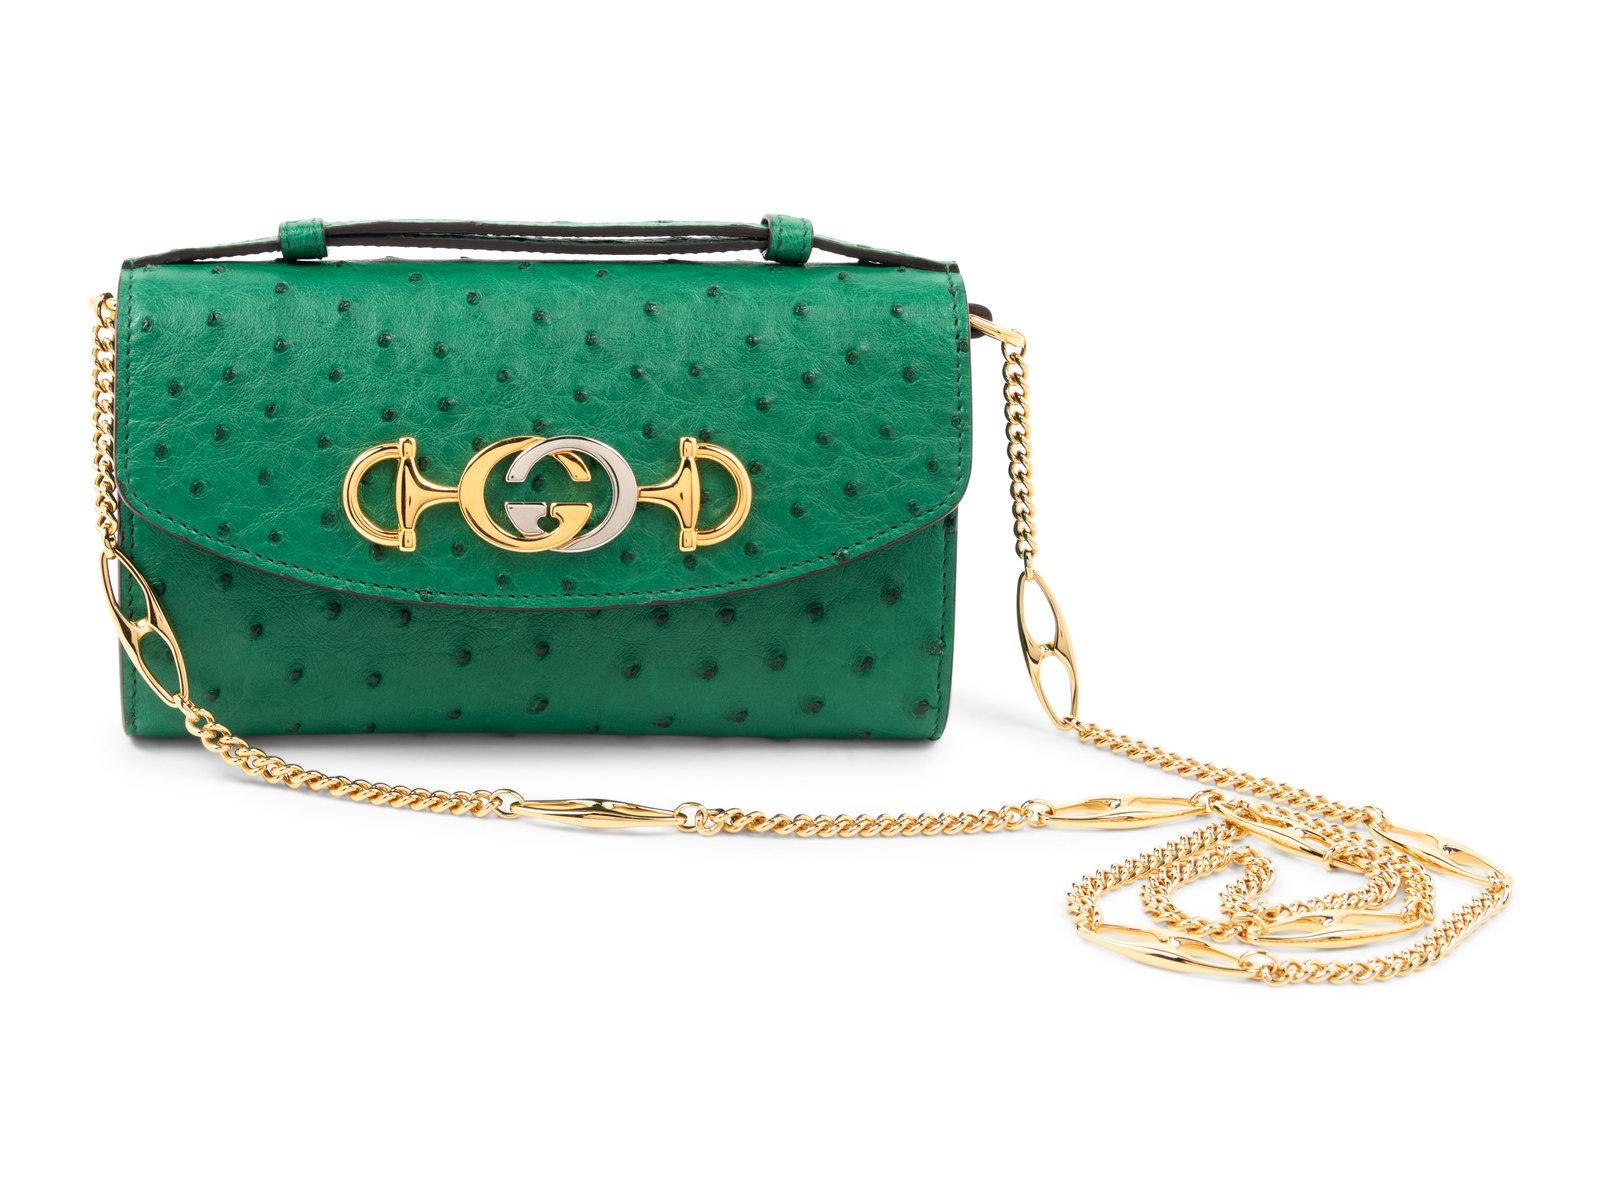 Gucci Zumi Ostrich Rare Crossbody Clutch Bag circa 2019. First introduced under the creative direction of Alessandro Michele, the Zumi made its debut on the Spring/Summer 2019 runway and is inspired by Michele's muse experimental musician Zumi